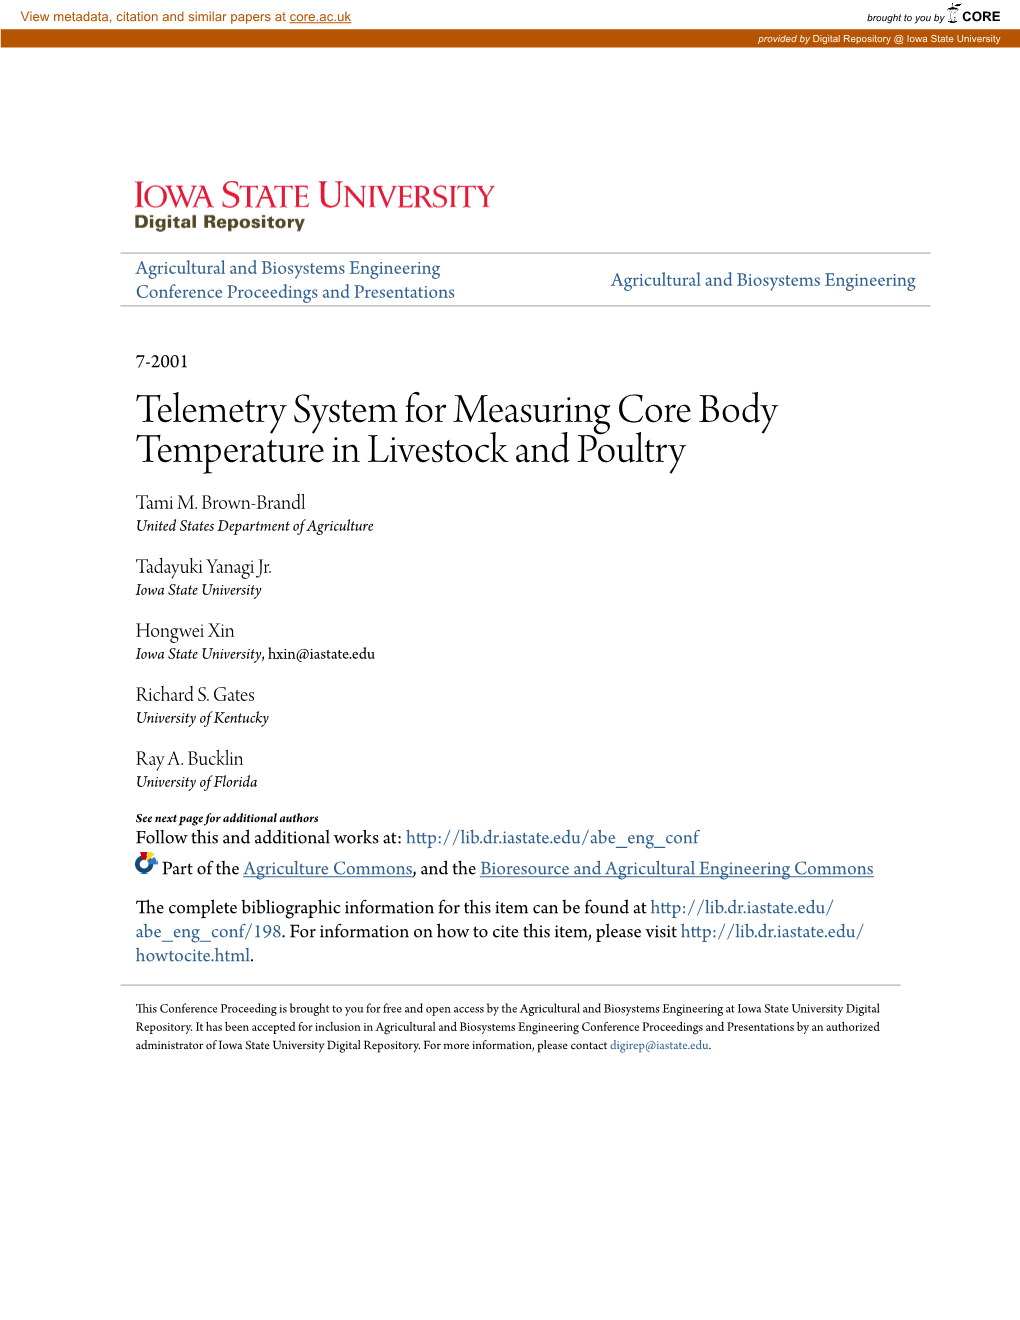 Telemetry System for Measuring Core Body Temperature in Livestock and Poultry Tami M